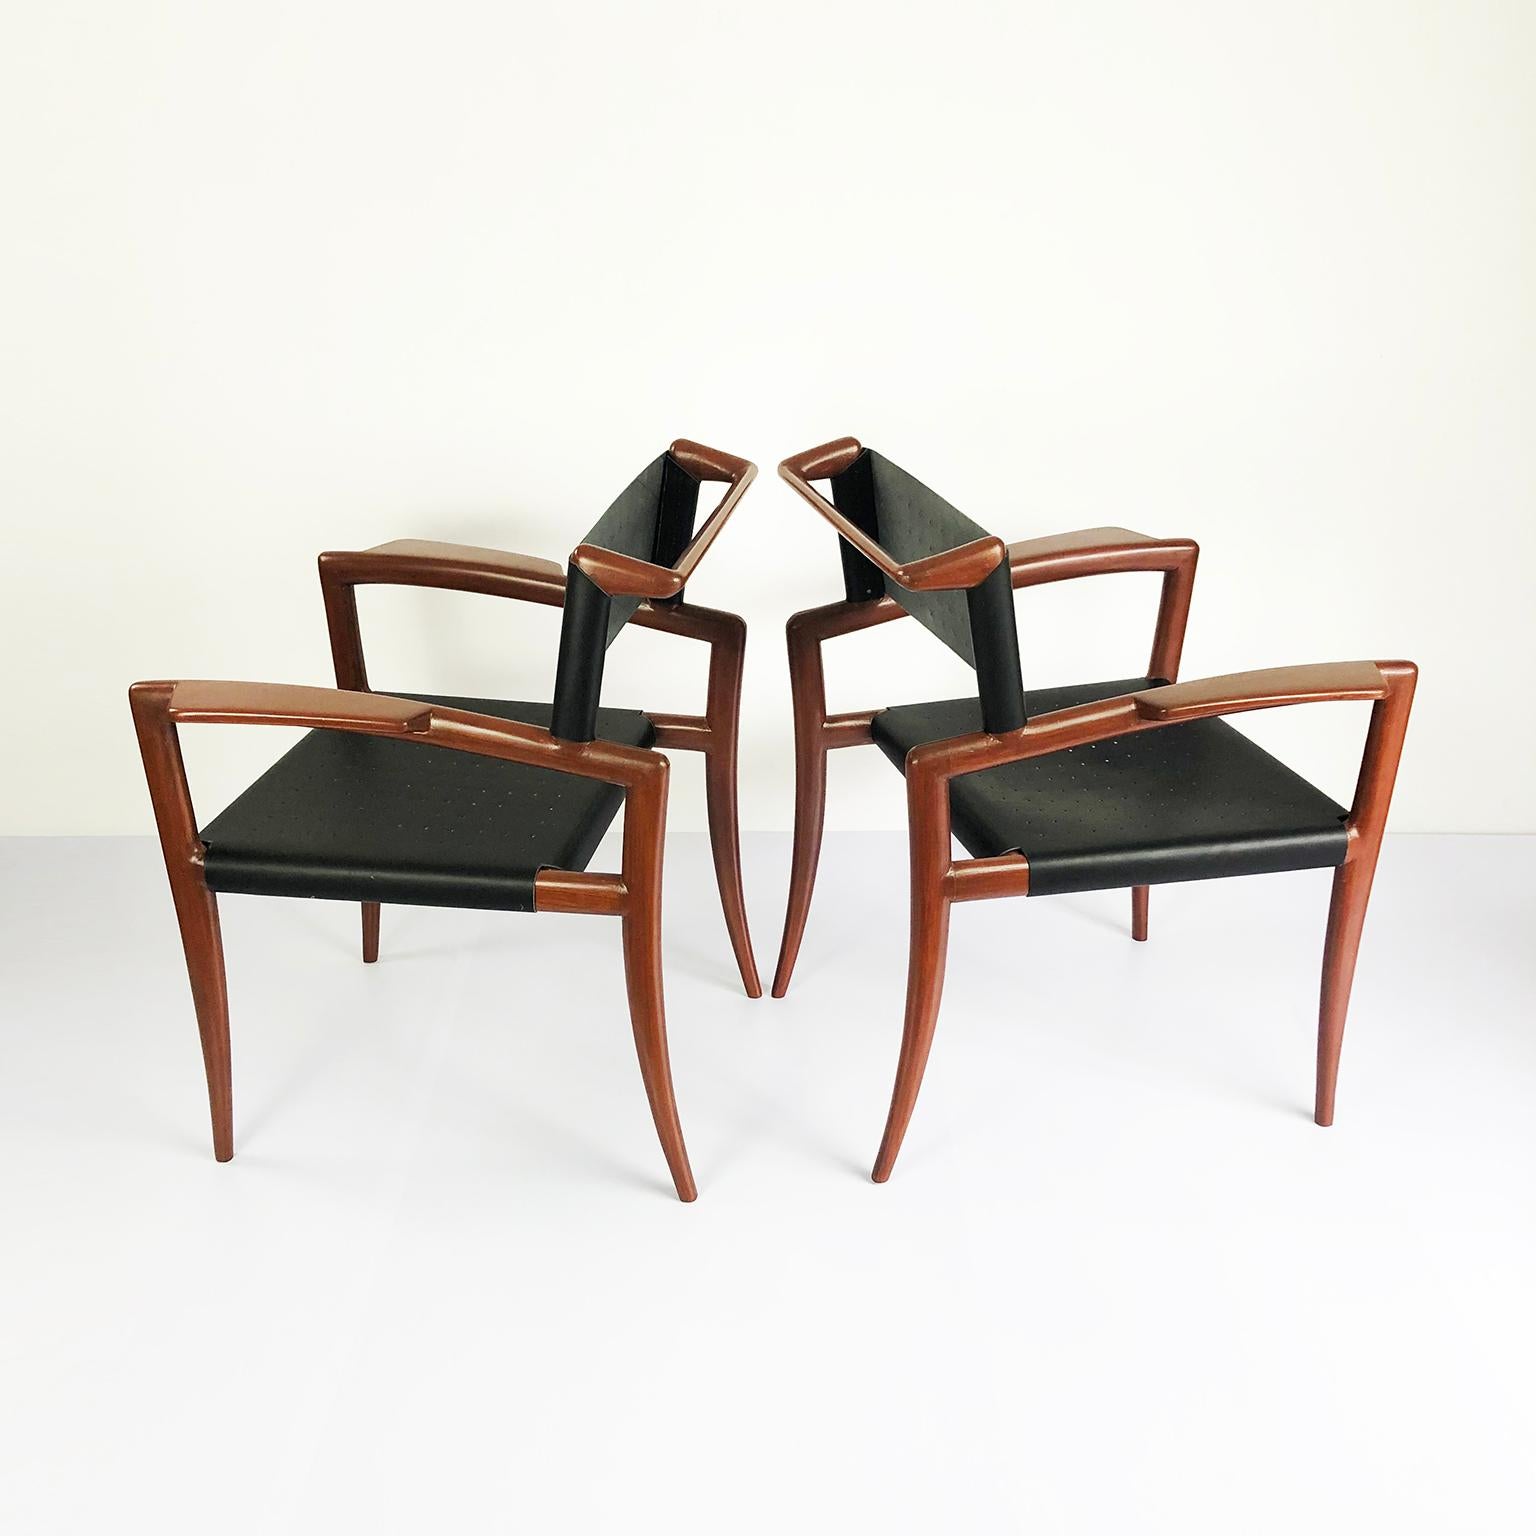 We offer this extremely rare pair of sculptural klismos armchairs designed by Charles Allen for Regil de Yucatan in 1952, recently refinished and reupholstered with new black leather matching the original design.